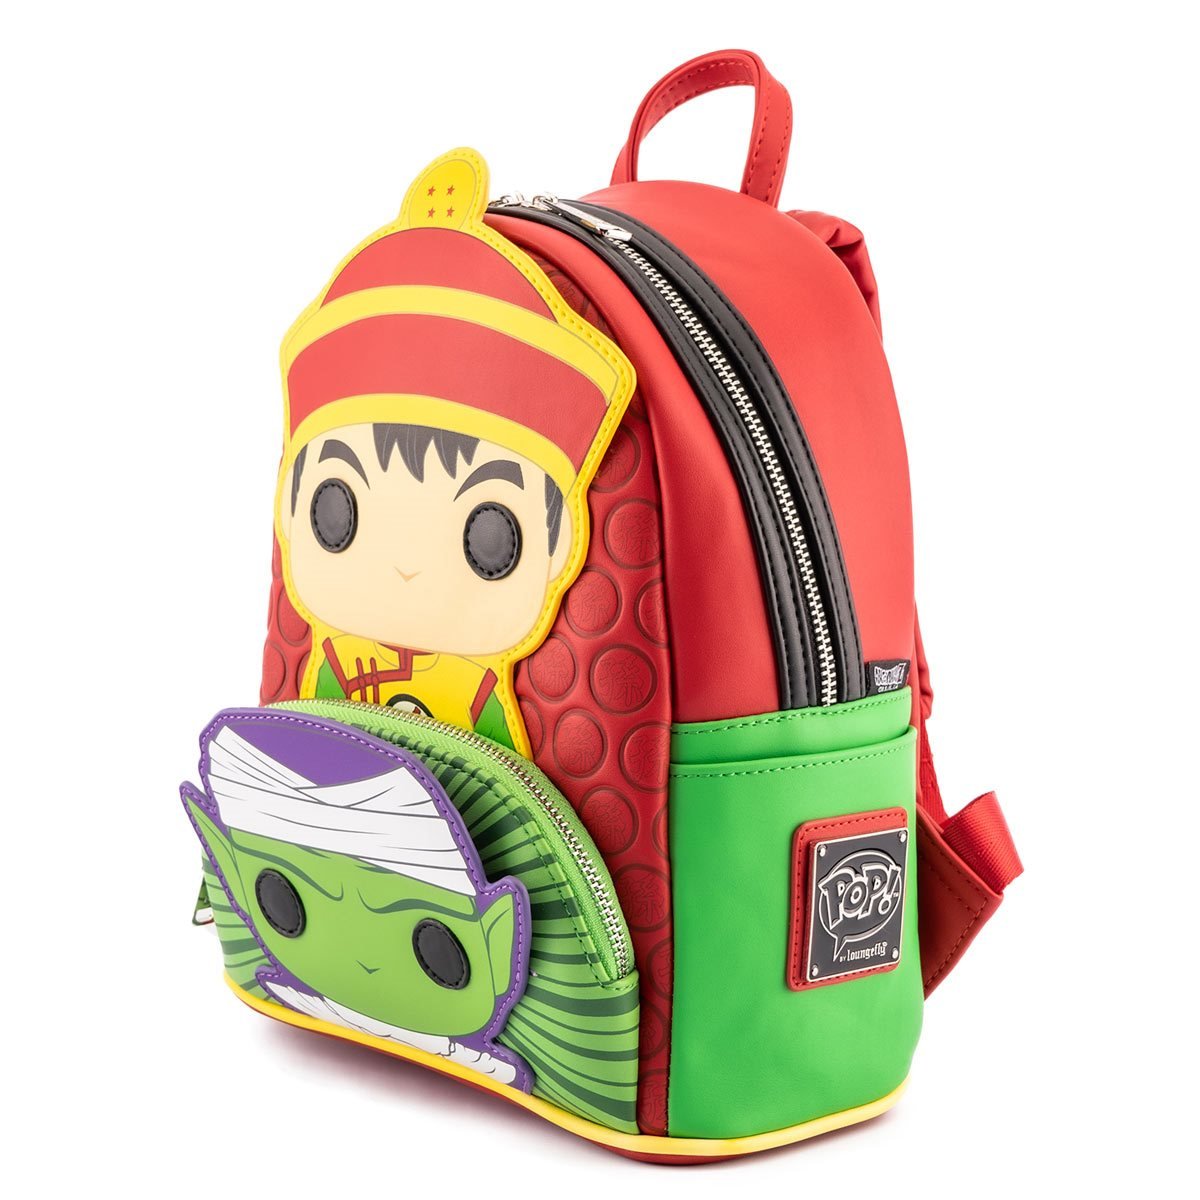 Loungefly - DRAGONBALL Z GOHAN & PICCOLO BACKPACK